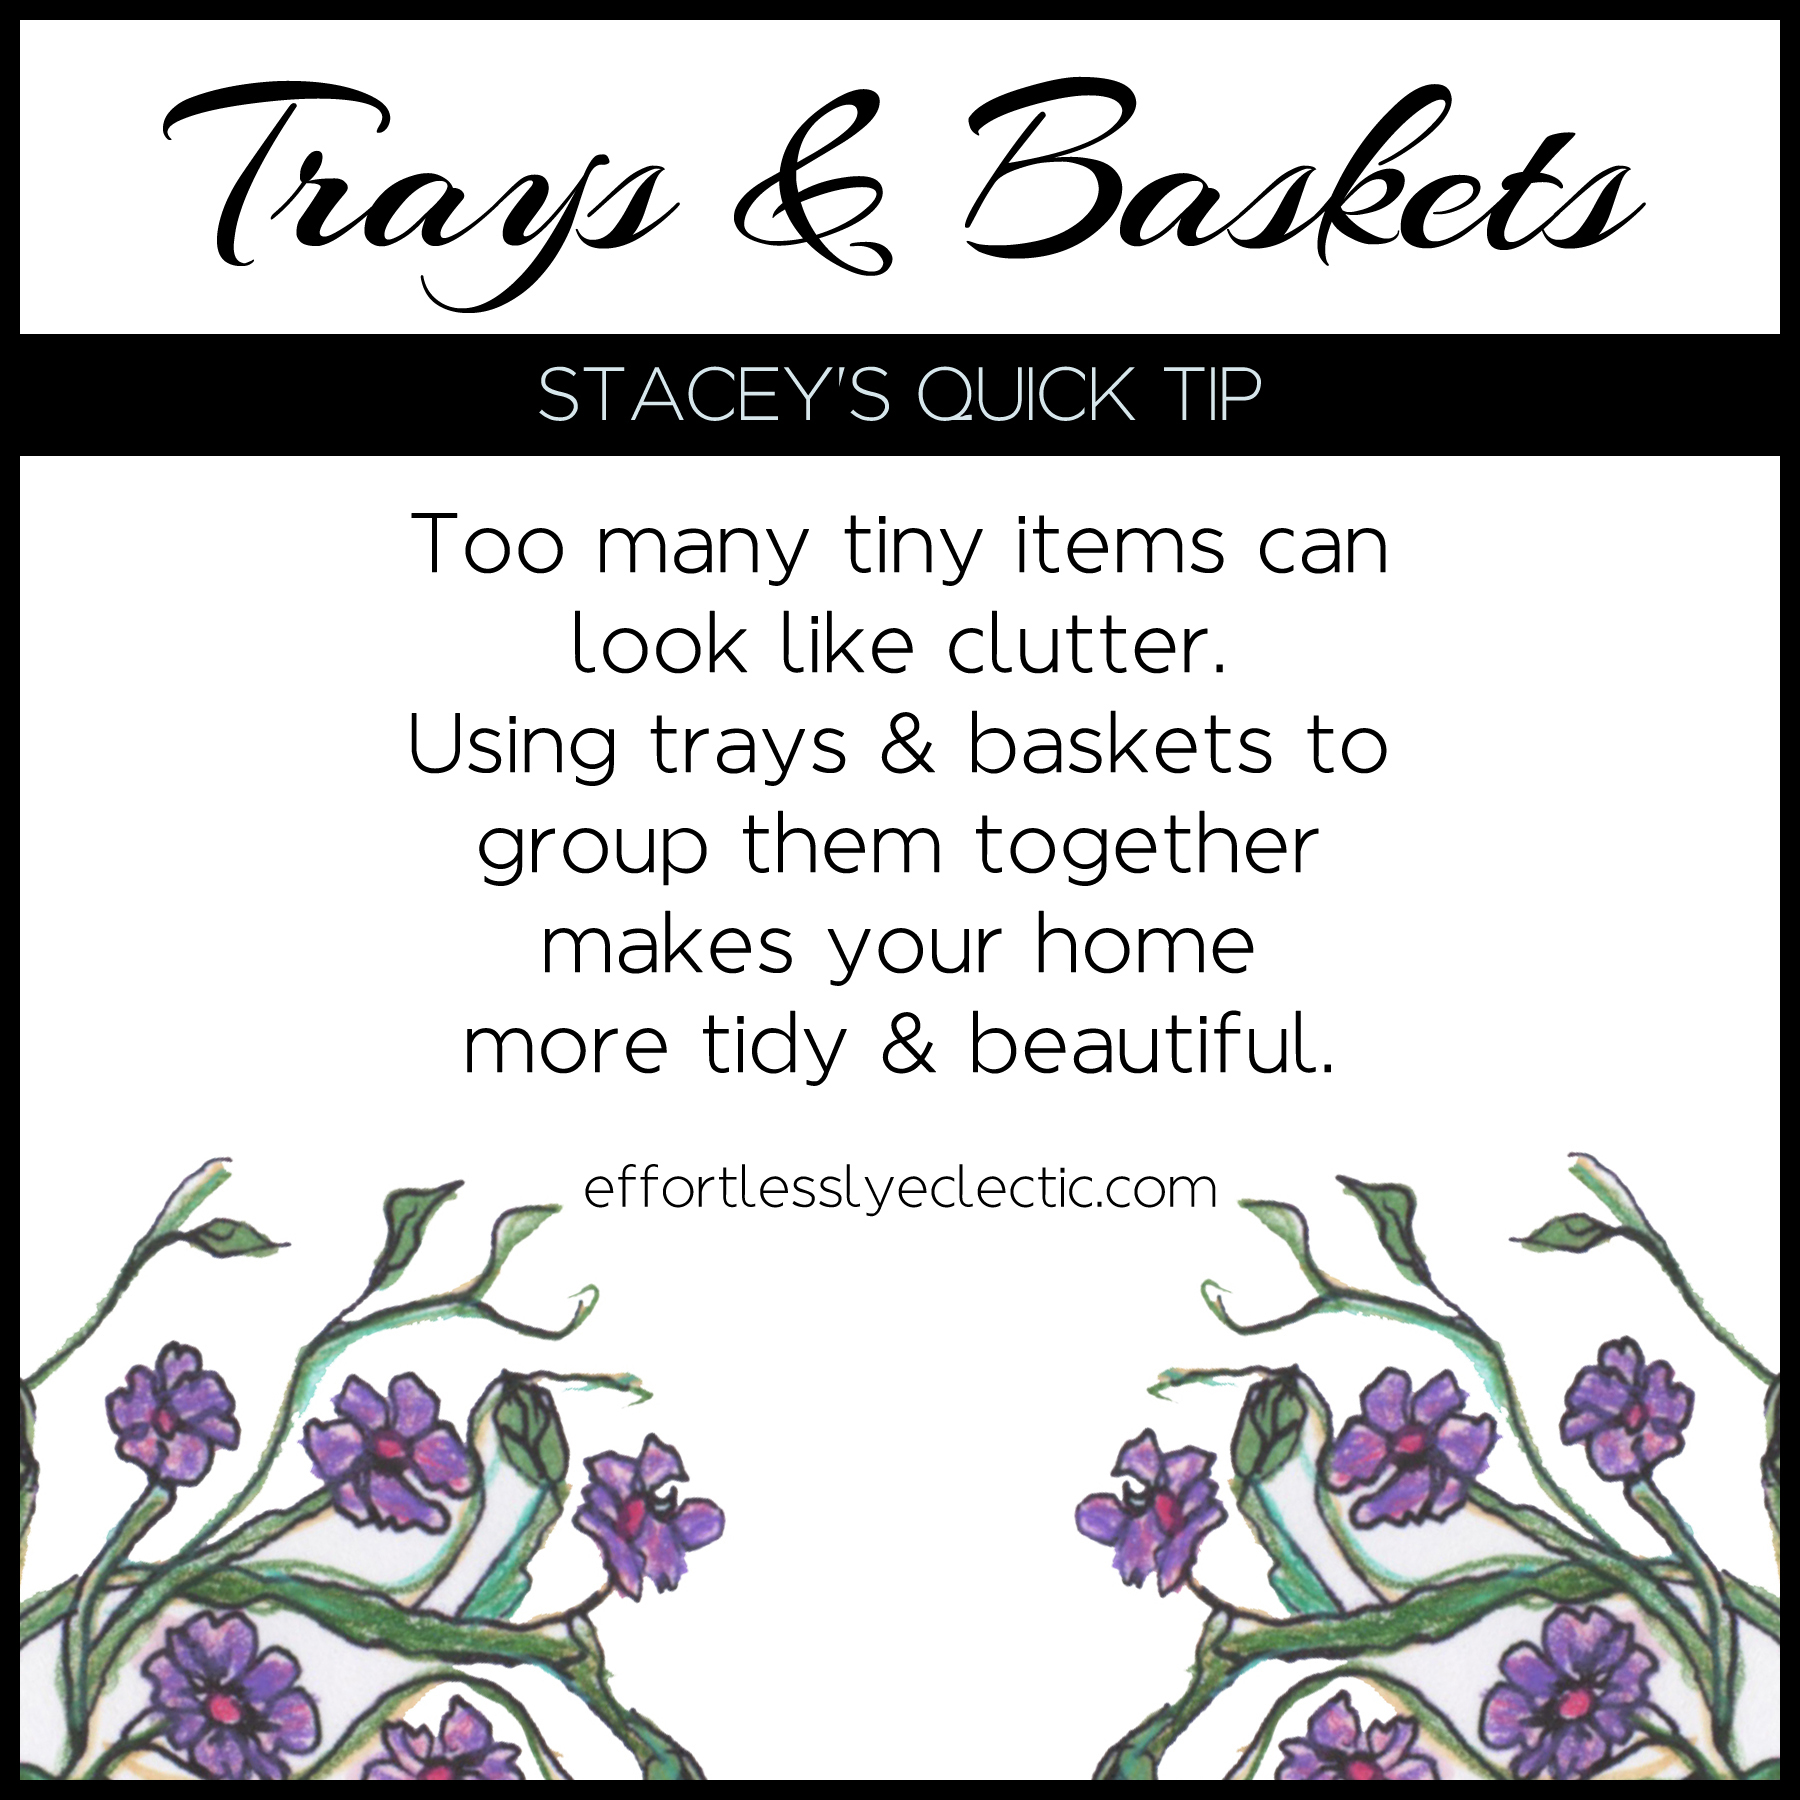 Trays and Baskets - A home decor tip about decorating with trays &amp; baskets